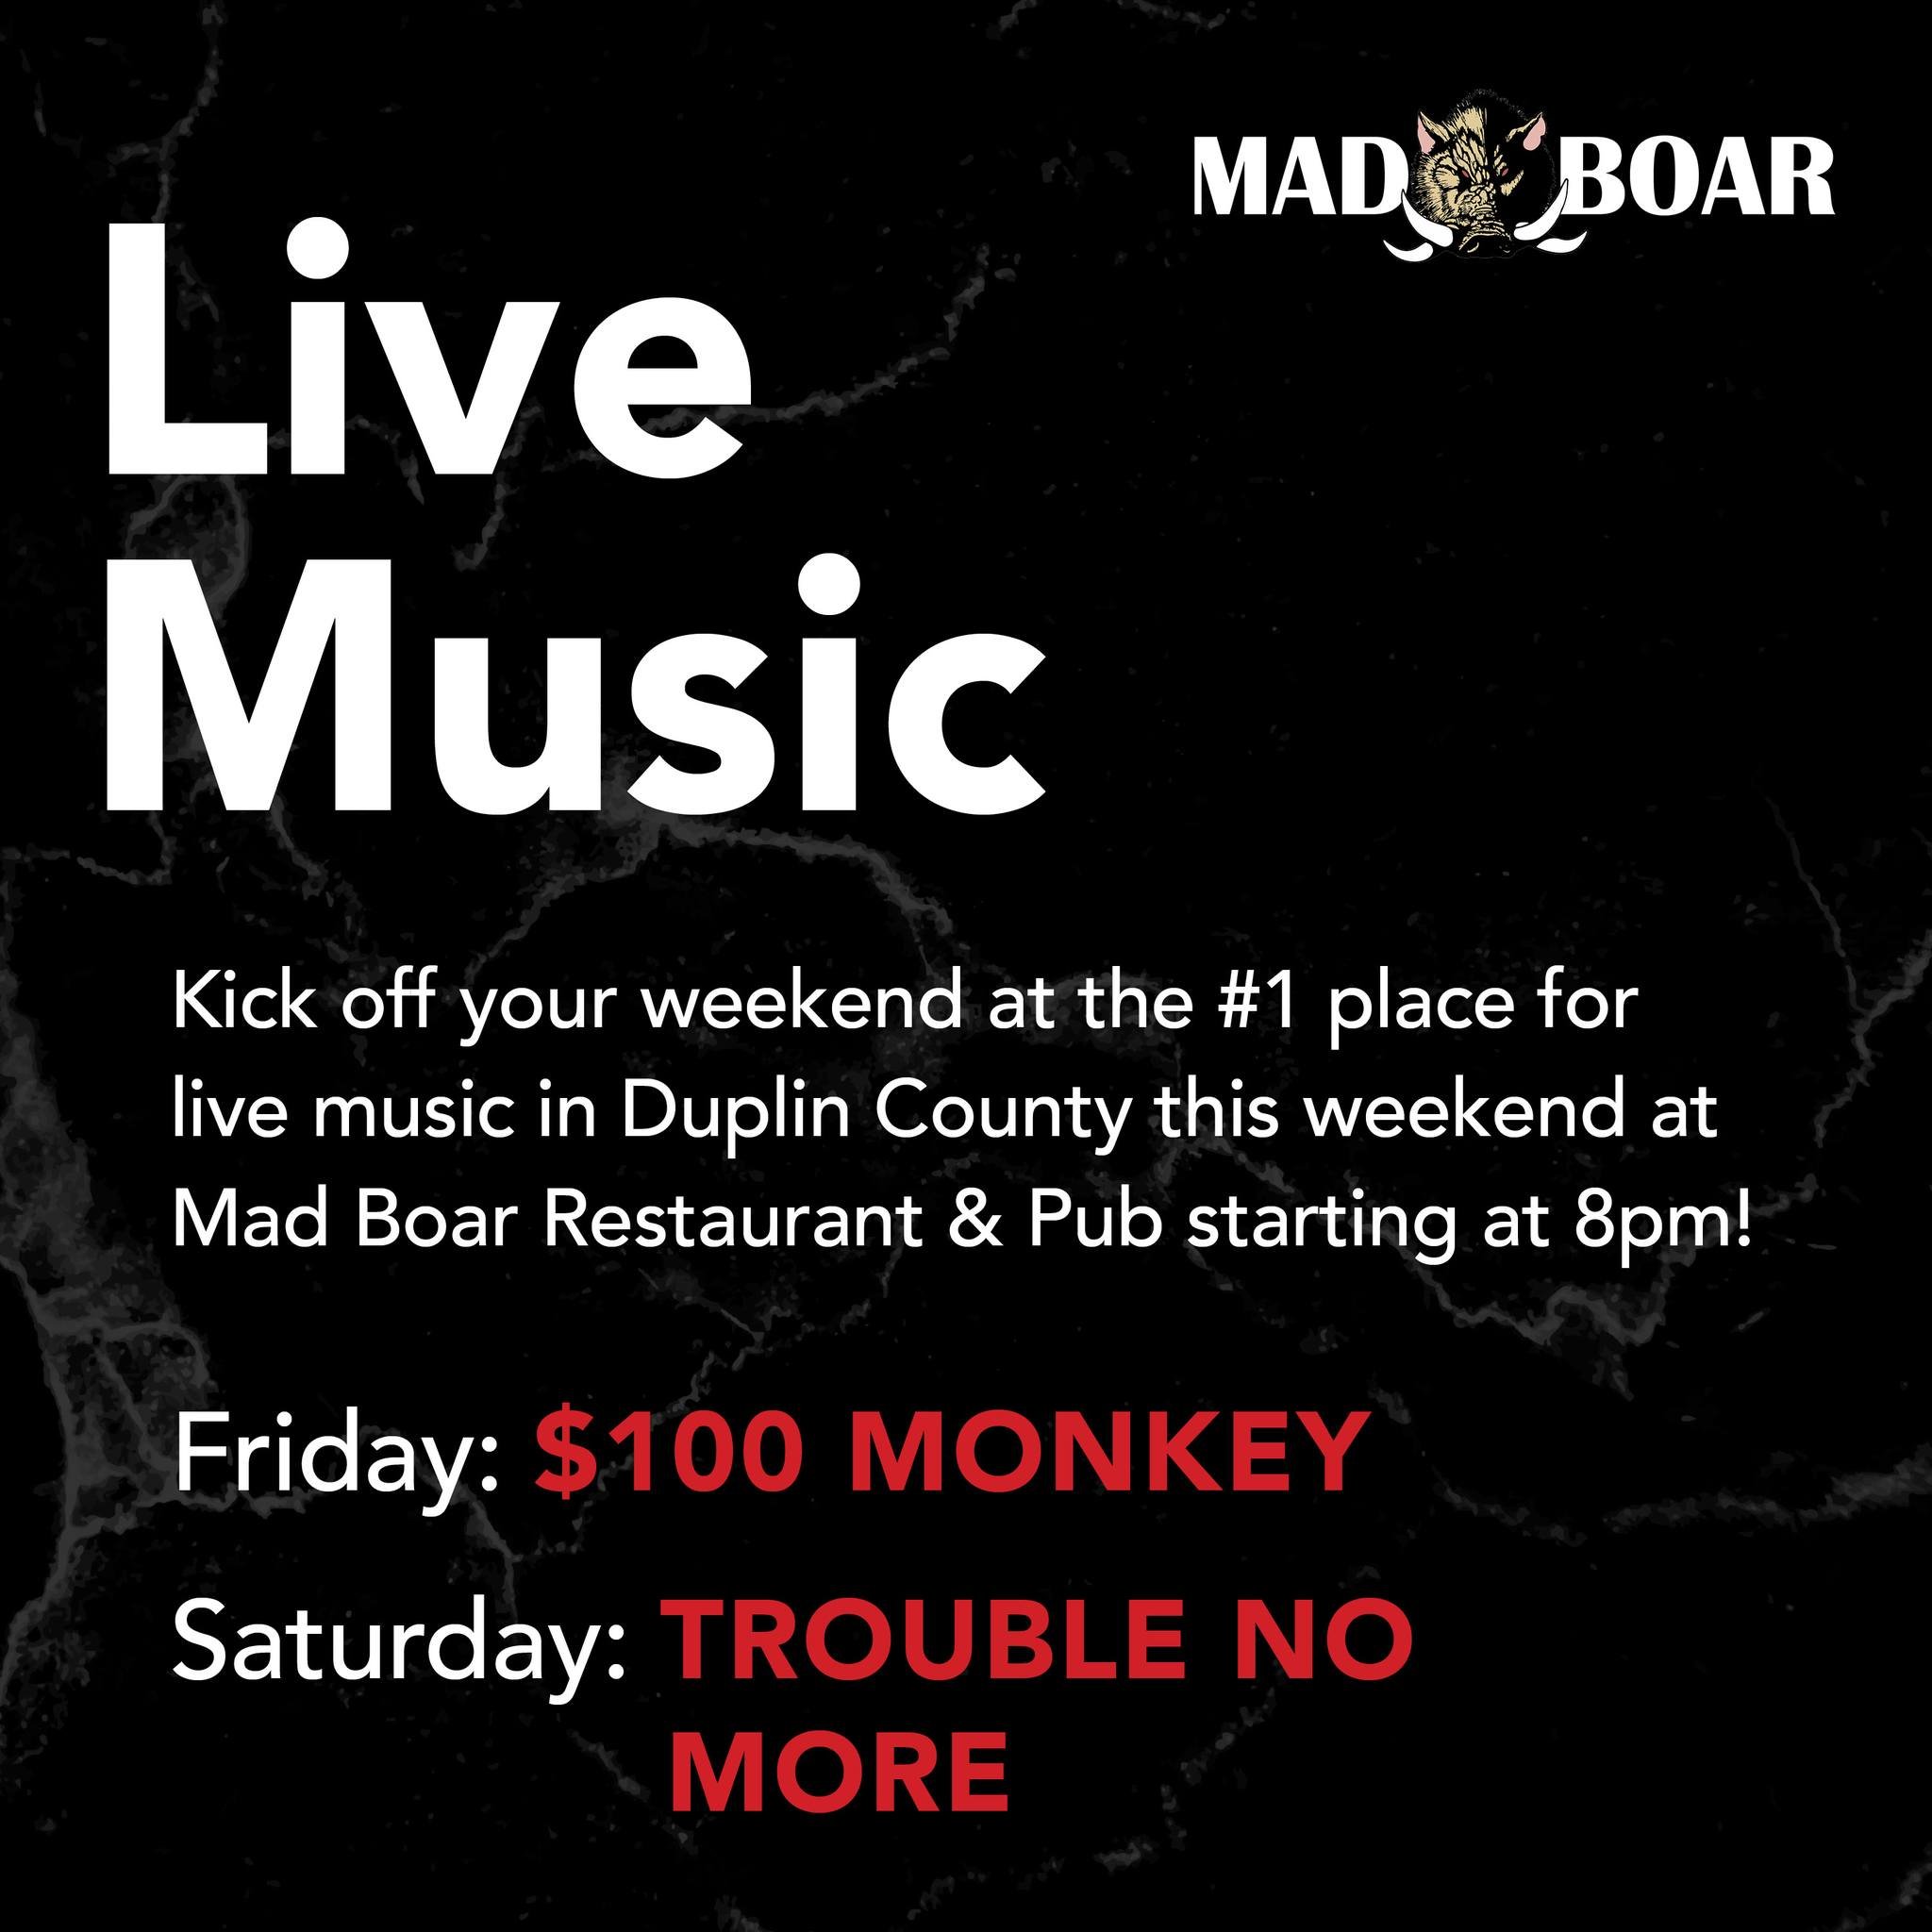 We are excited to announce this weekend's live music lineup! 

#livemusic #supportlocalmusic #localband #madboarnc #wallacenc #music #livemusicvenue